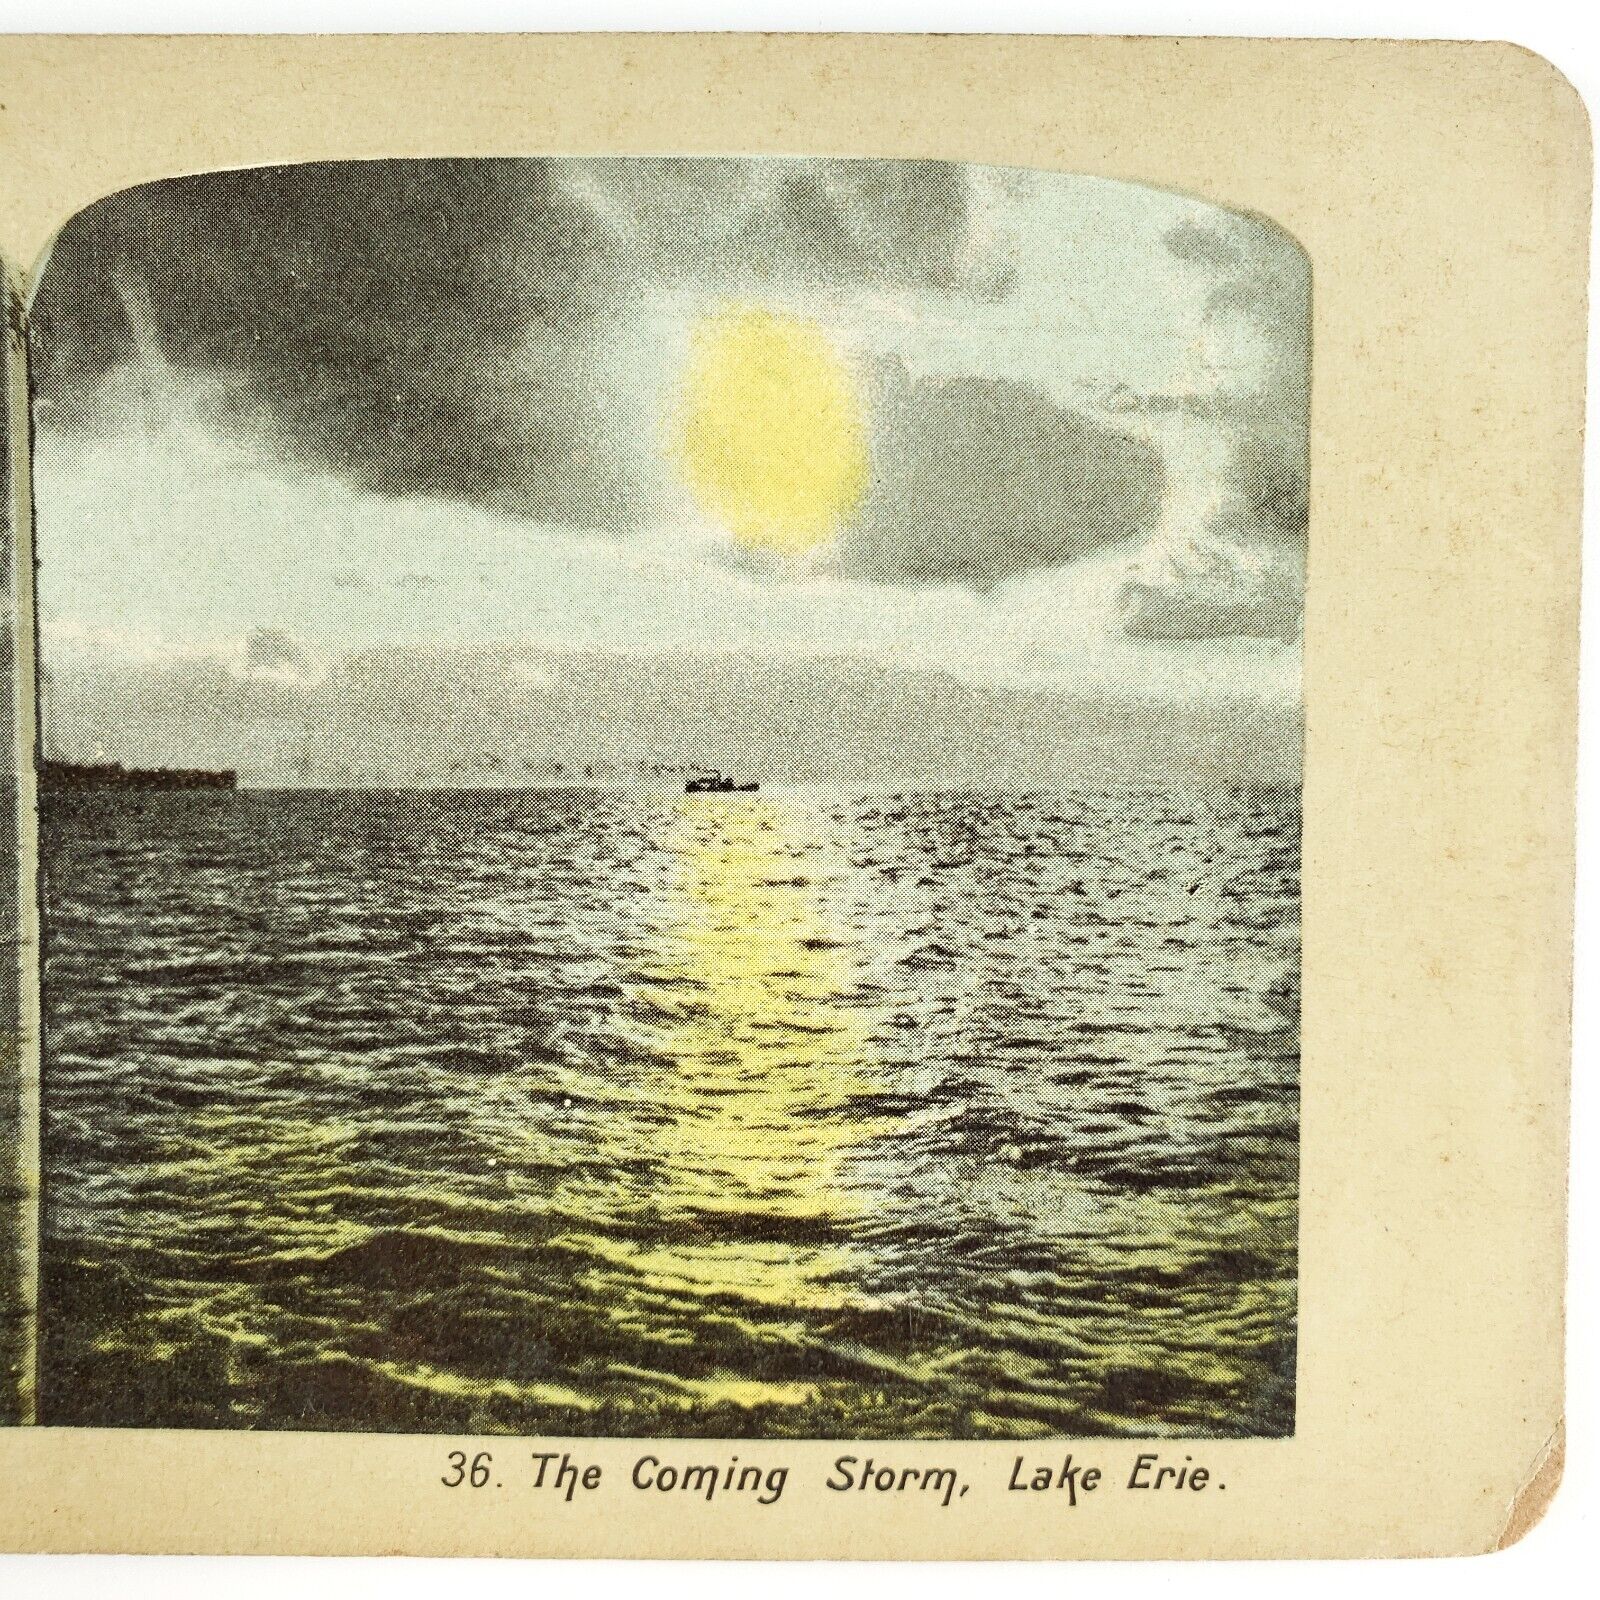 Lake Erie Boat Sunset Stereoview c1910 Approaching Coming Storm Water Ship N75